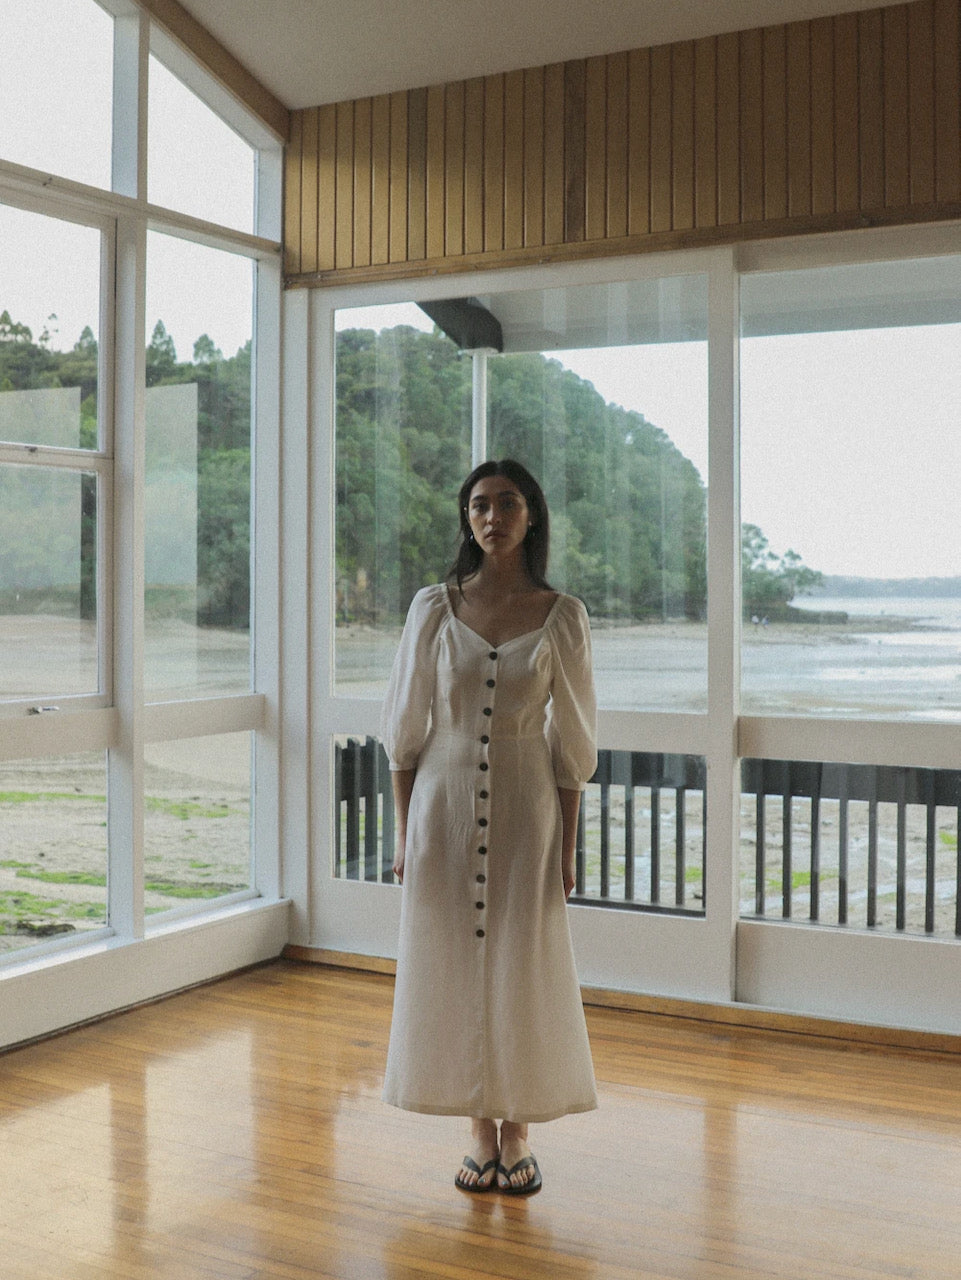 A sustainable Virginia Dress - Ice White designed by OVNA OVICH is worn by a woman standing elegantly in front of a window.